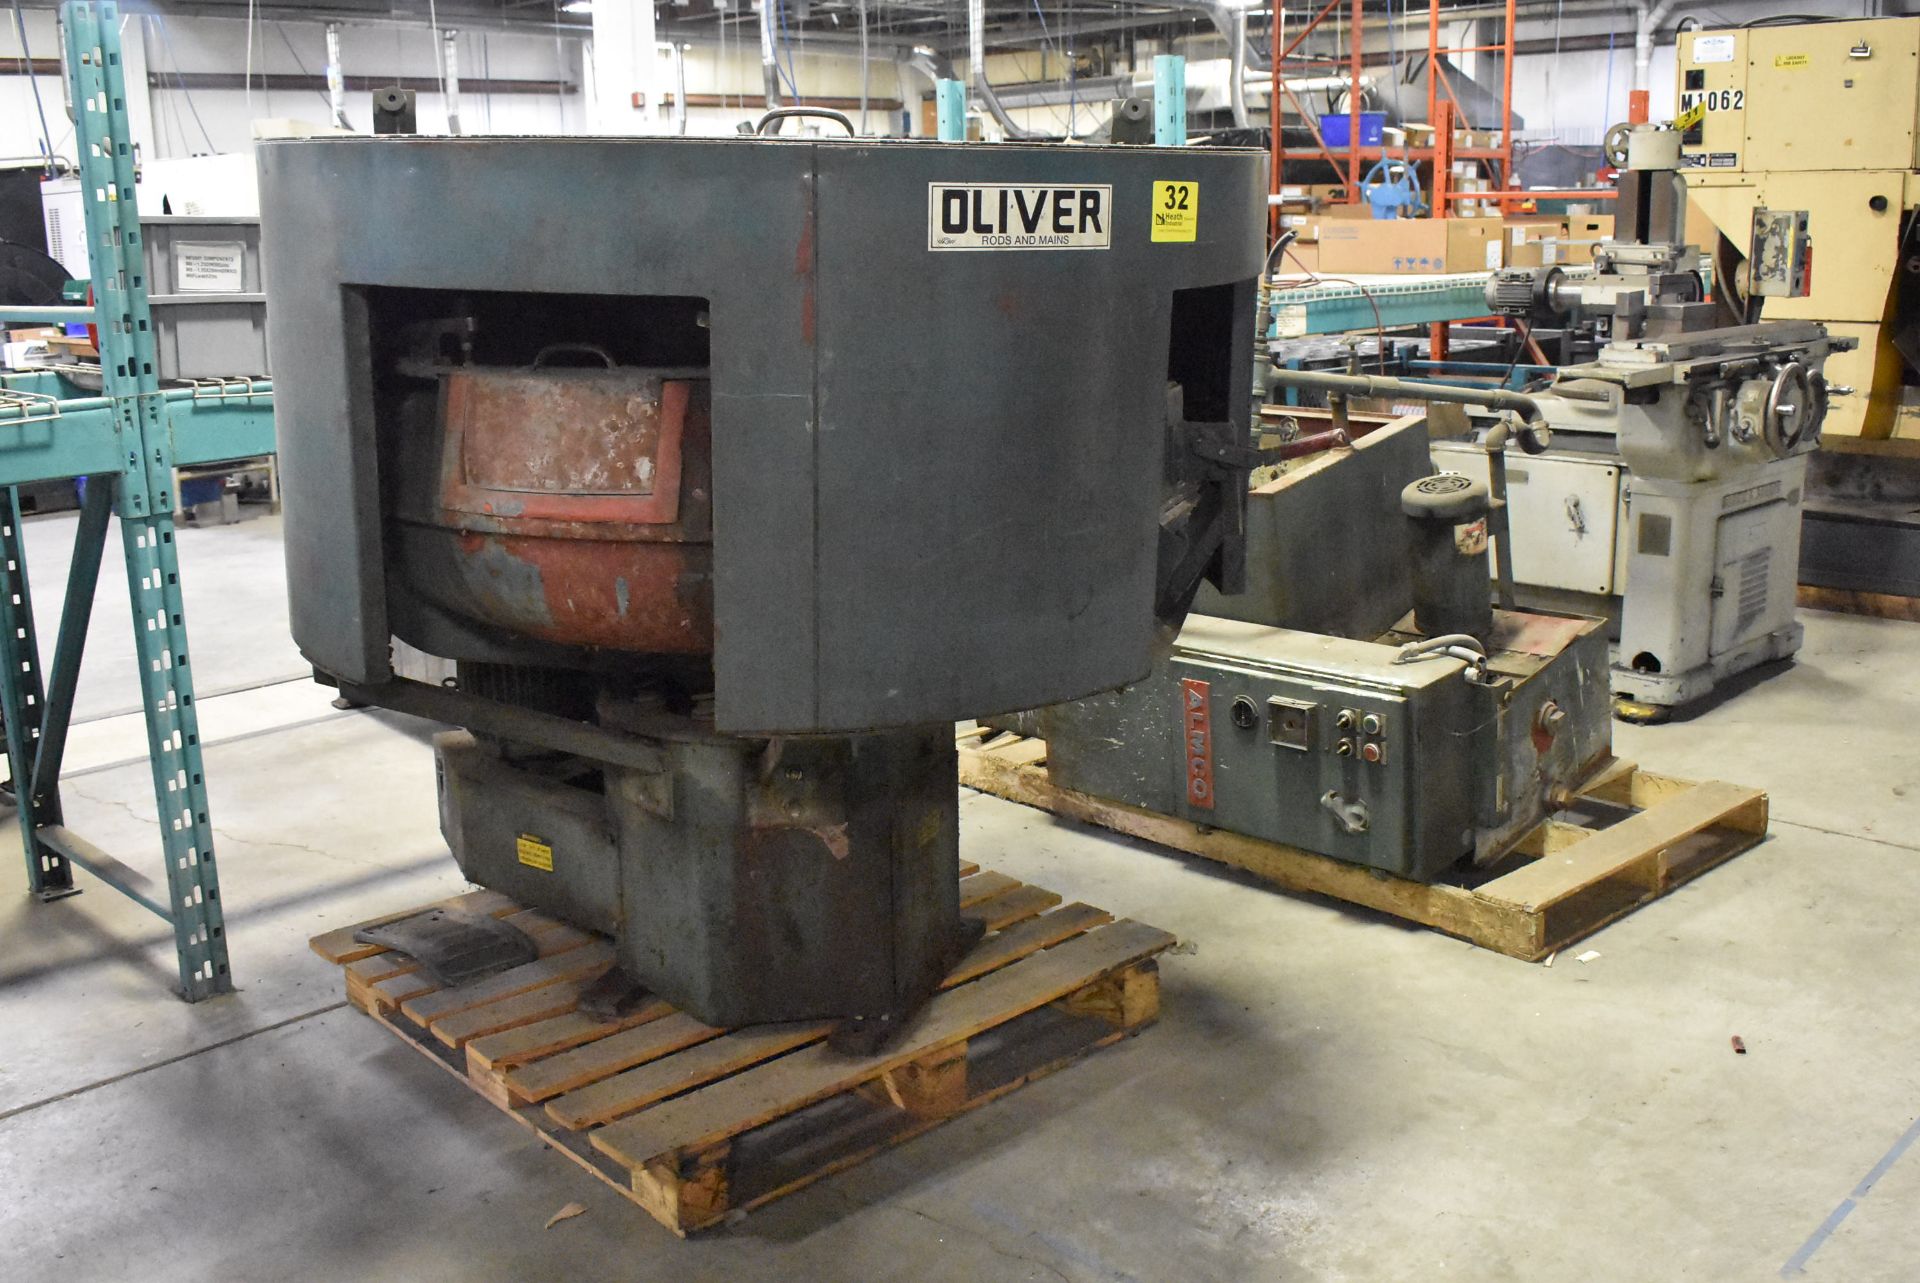 ALMCO MODEL OR-10V ROUND BOWL VIBRATORY DEBURRER S/N 108201, VARIABLE SPEED WITH CONTROLS, MEDIA - Image 2 of 11